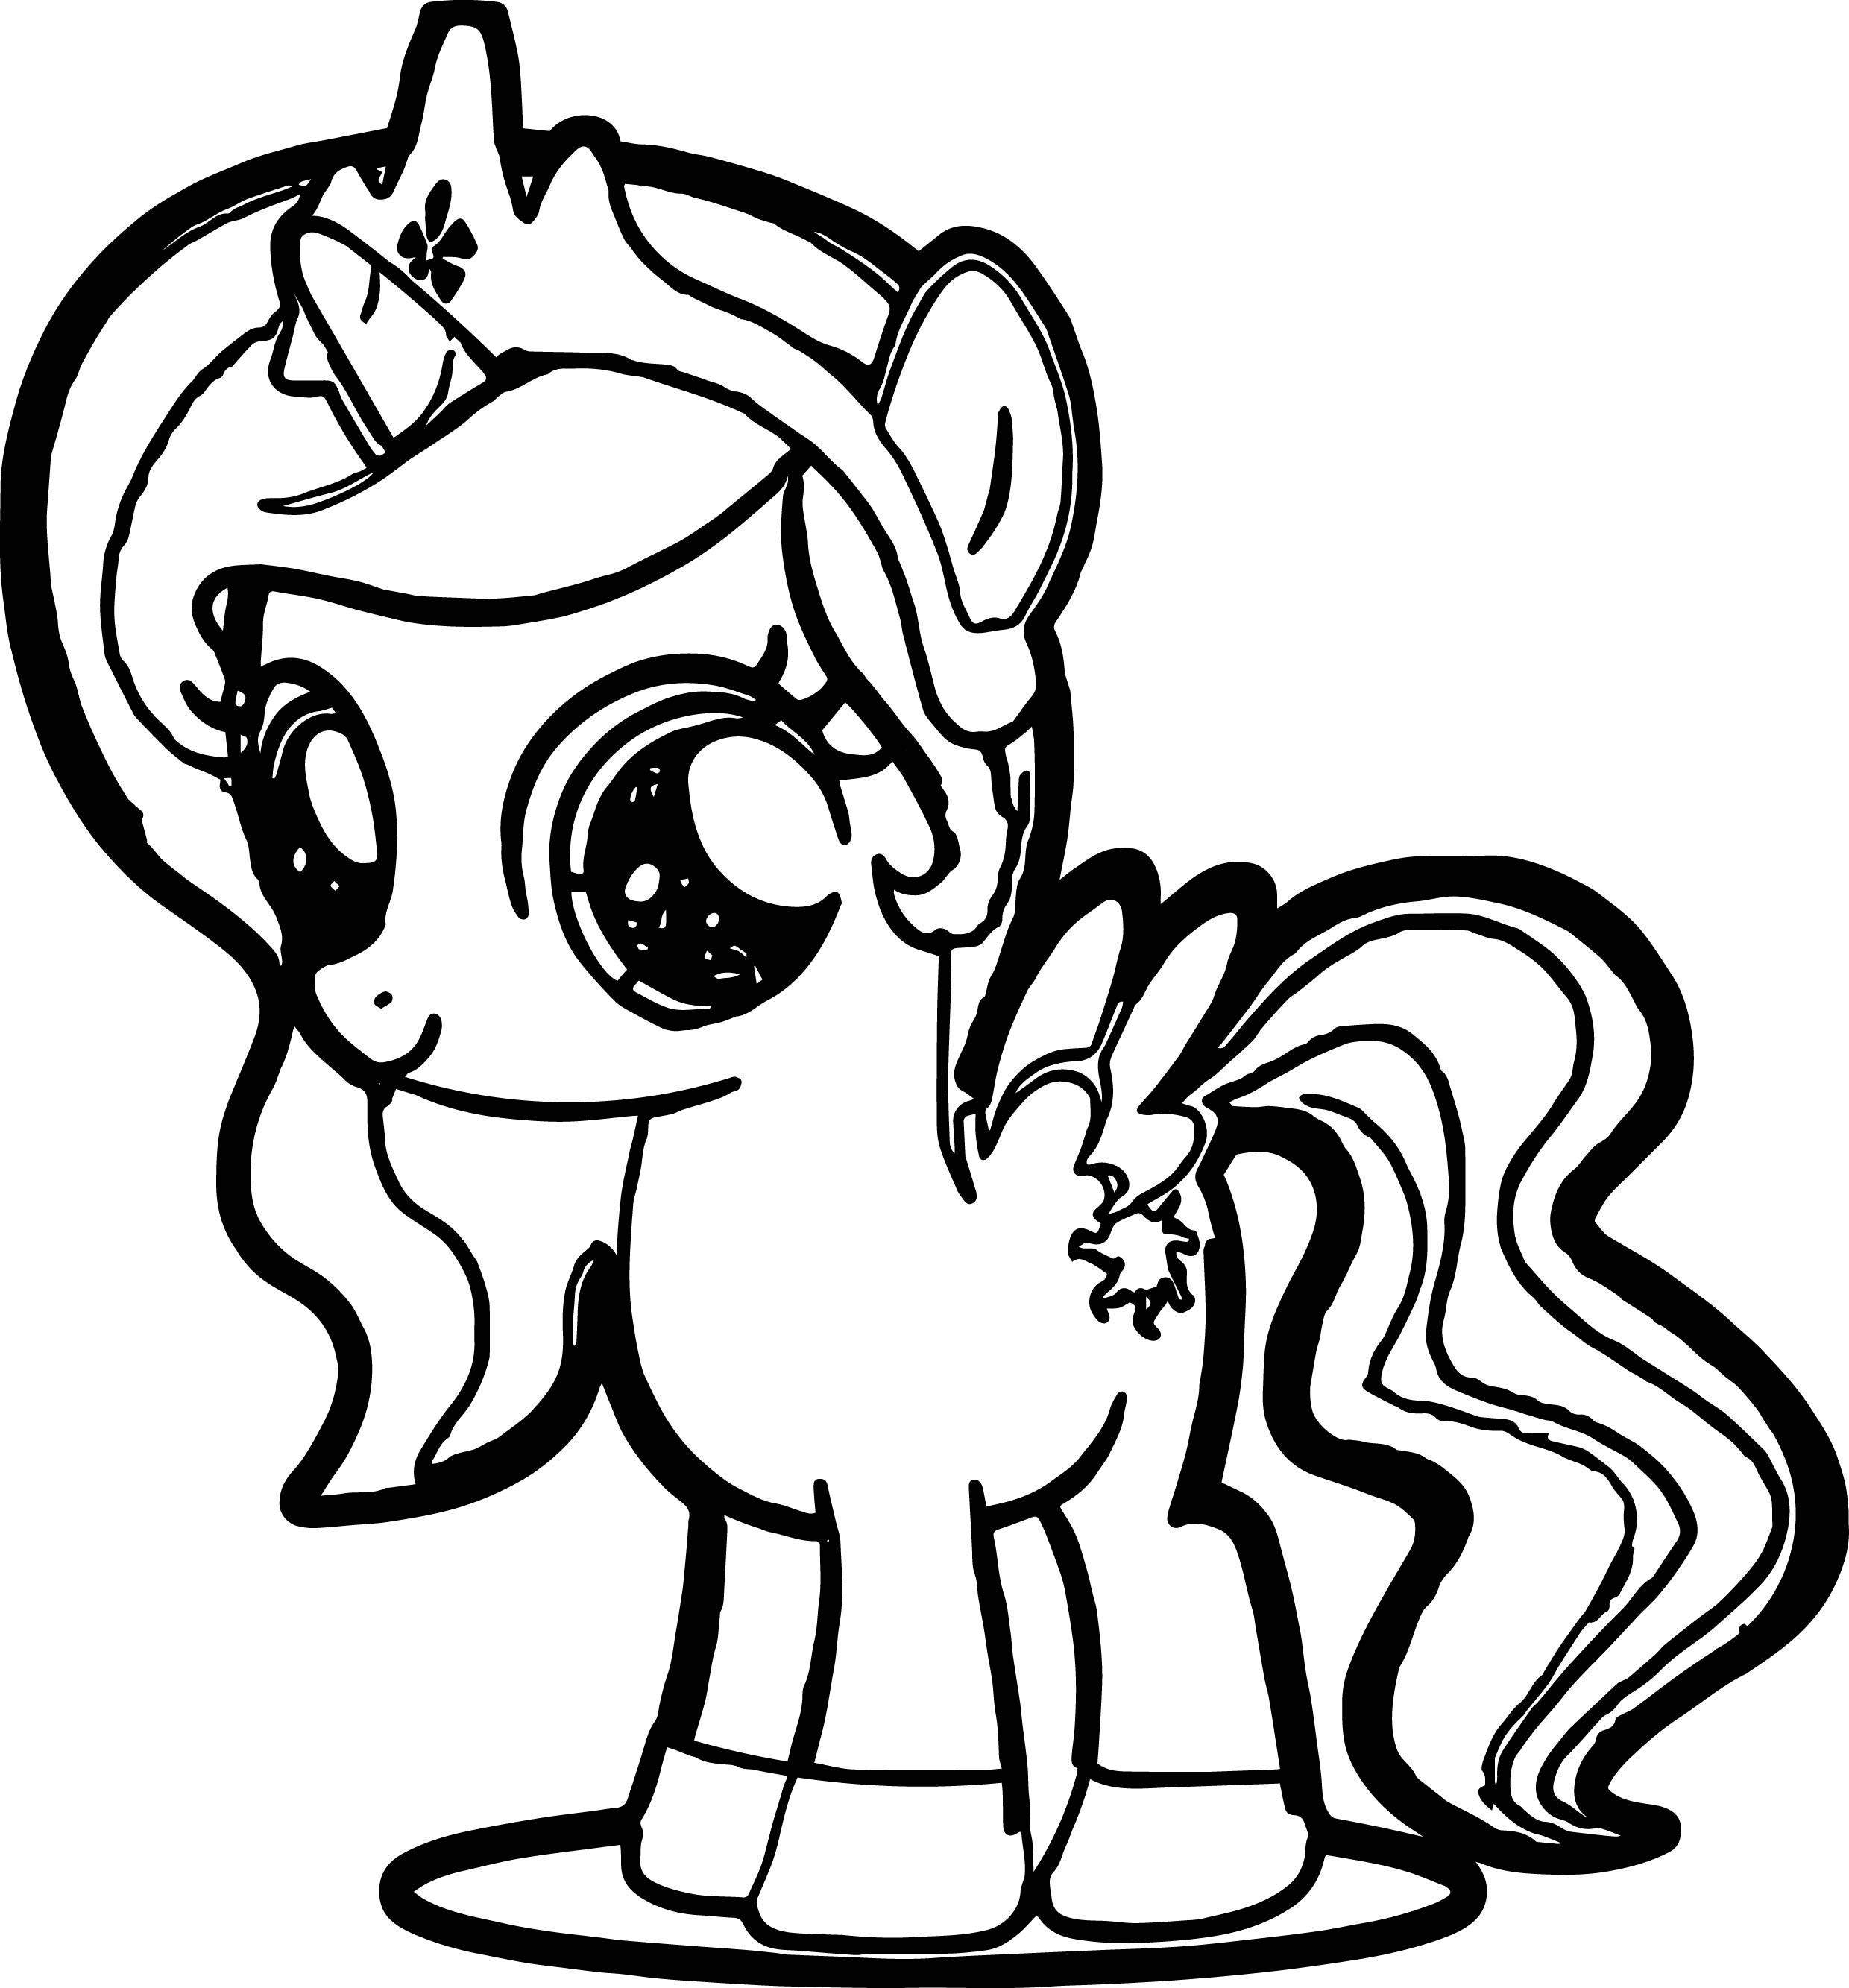 Cute Pony Coloring Pages at Free printable colorings